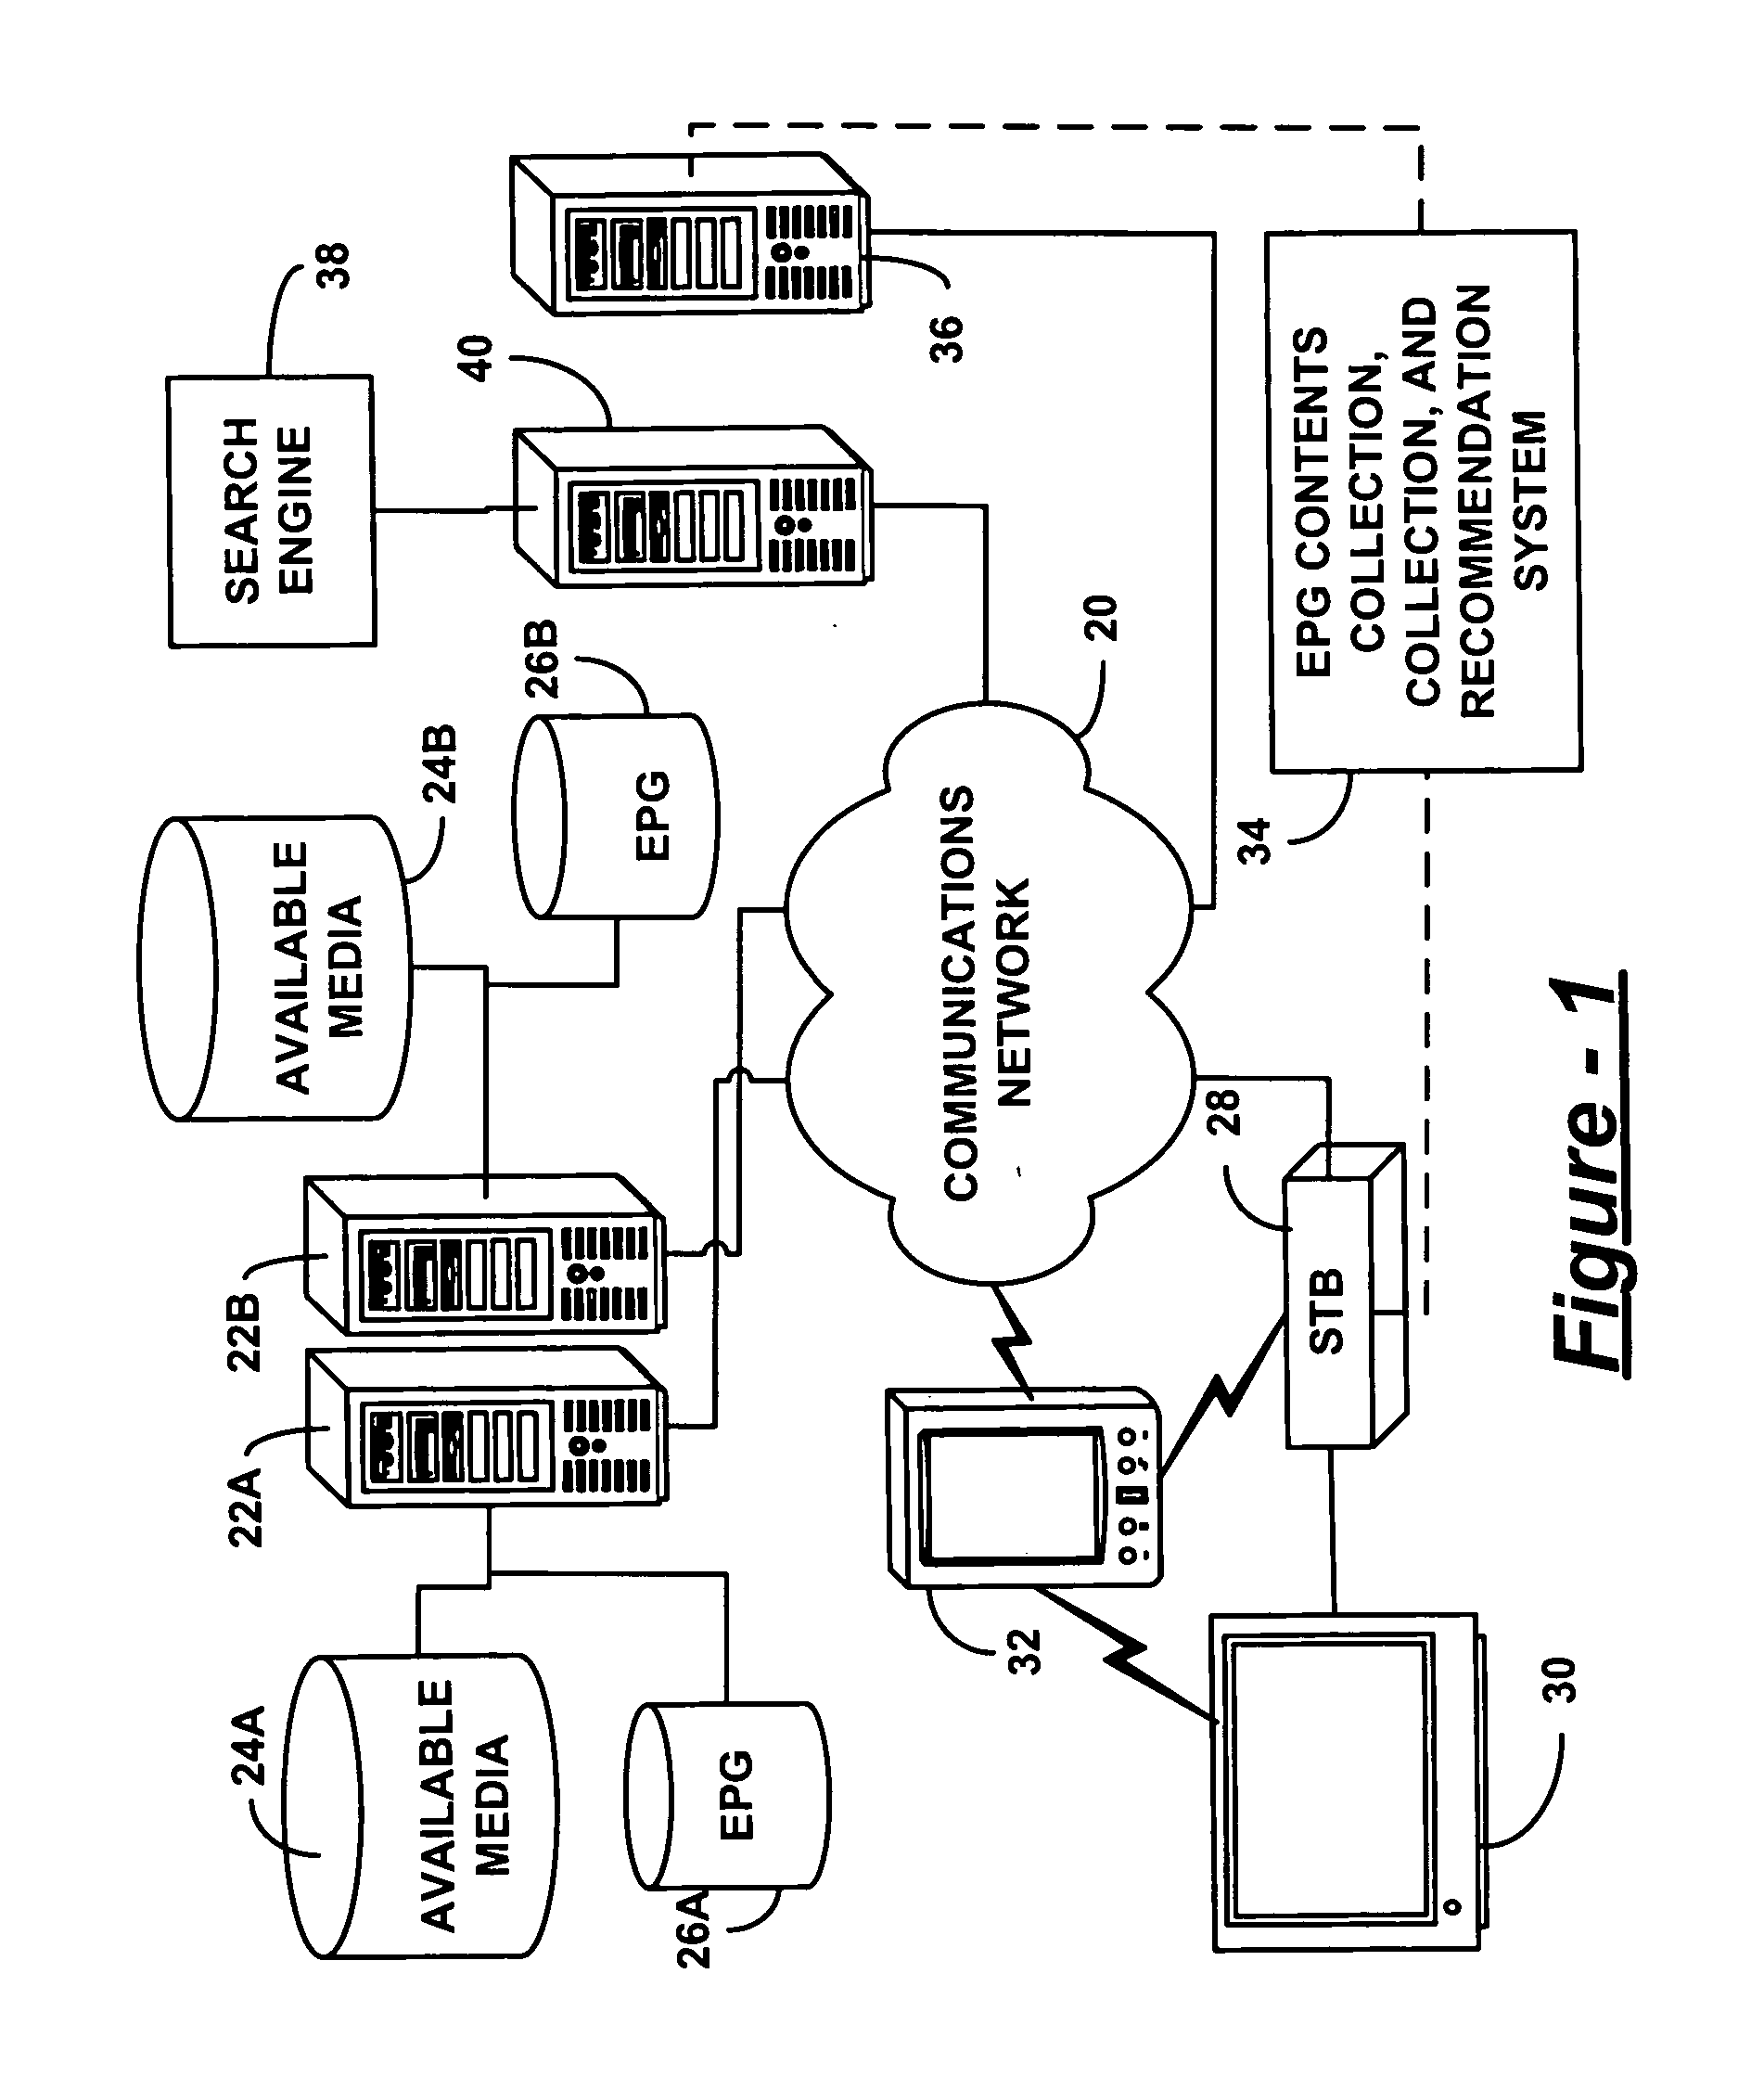 Programming guide content collection and recommendation system for viewing on a portable device